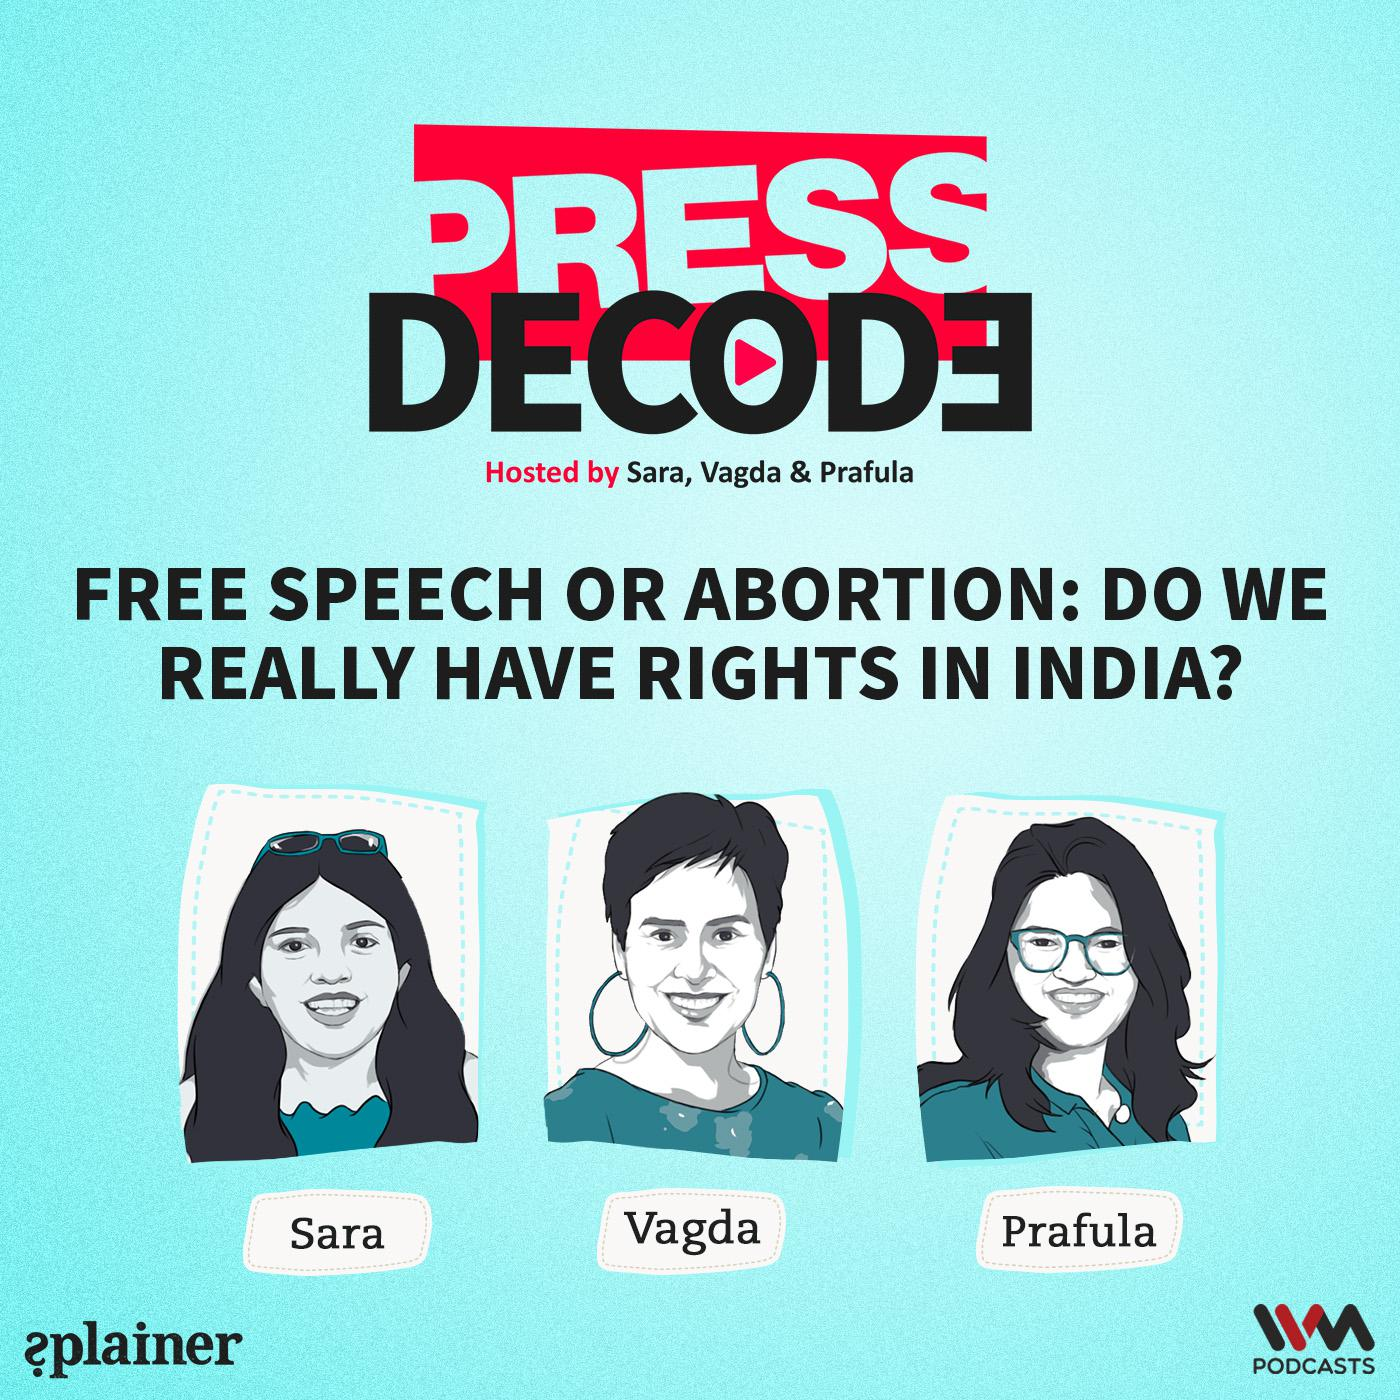 Free Speech or Abortion: Do we really have rights in India?